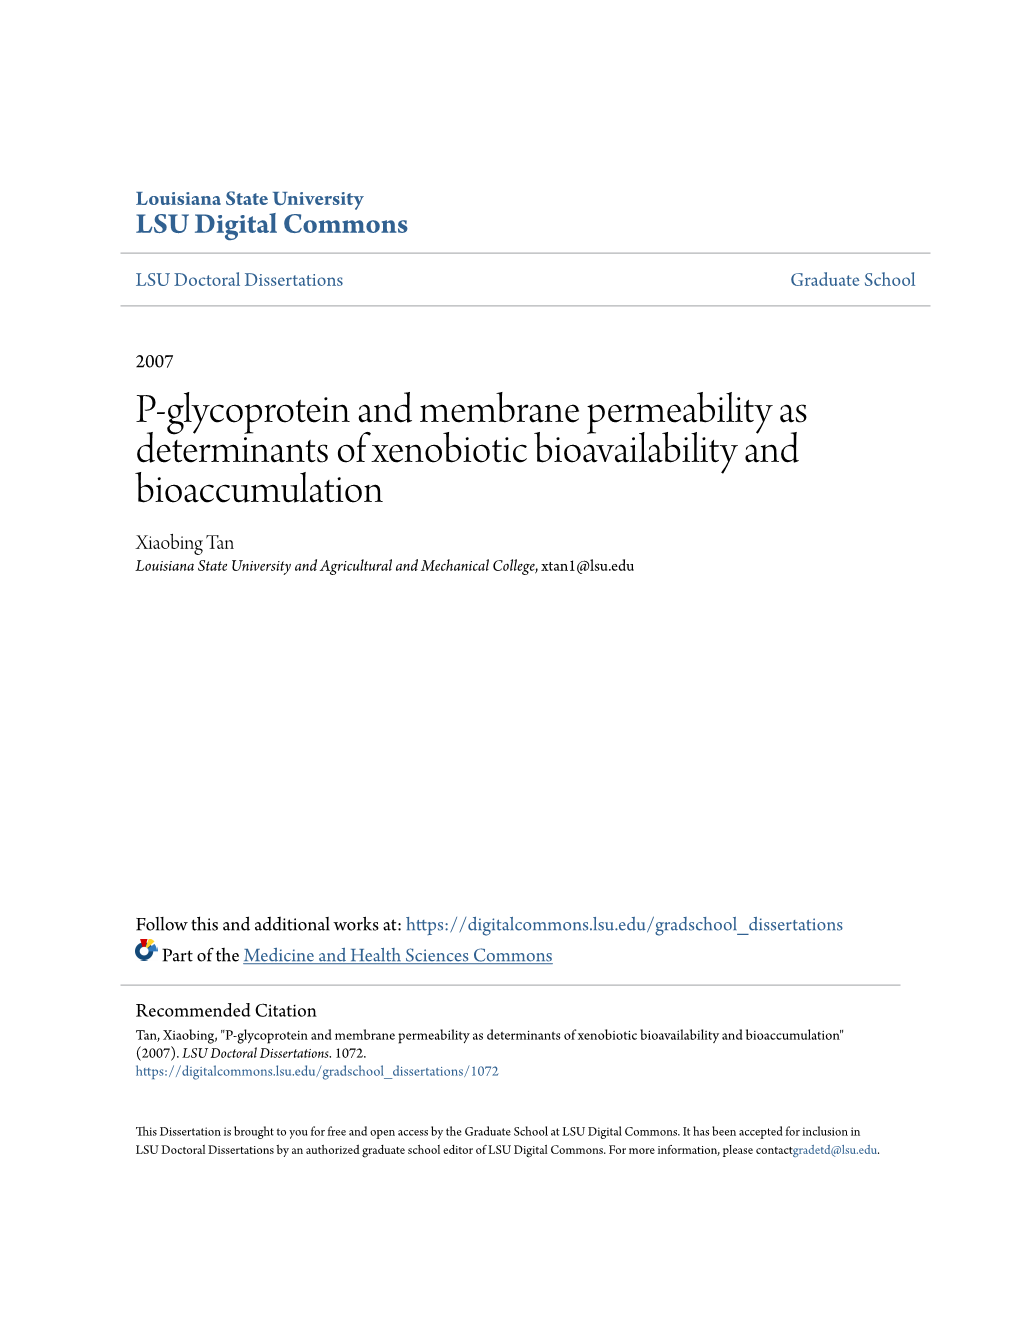 P-Glycoprotein and Membrane Permeability As Determinants Of